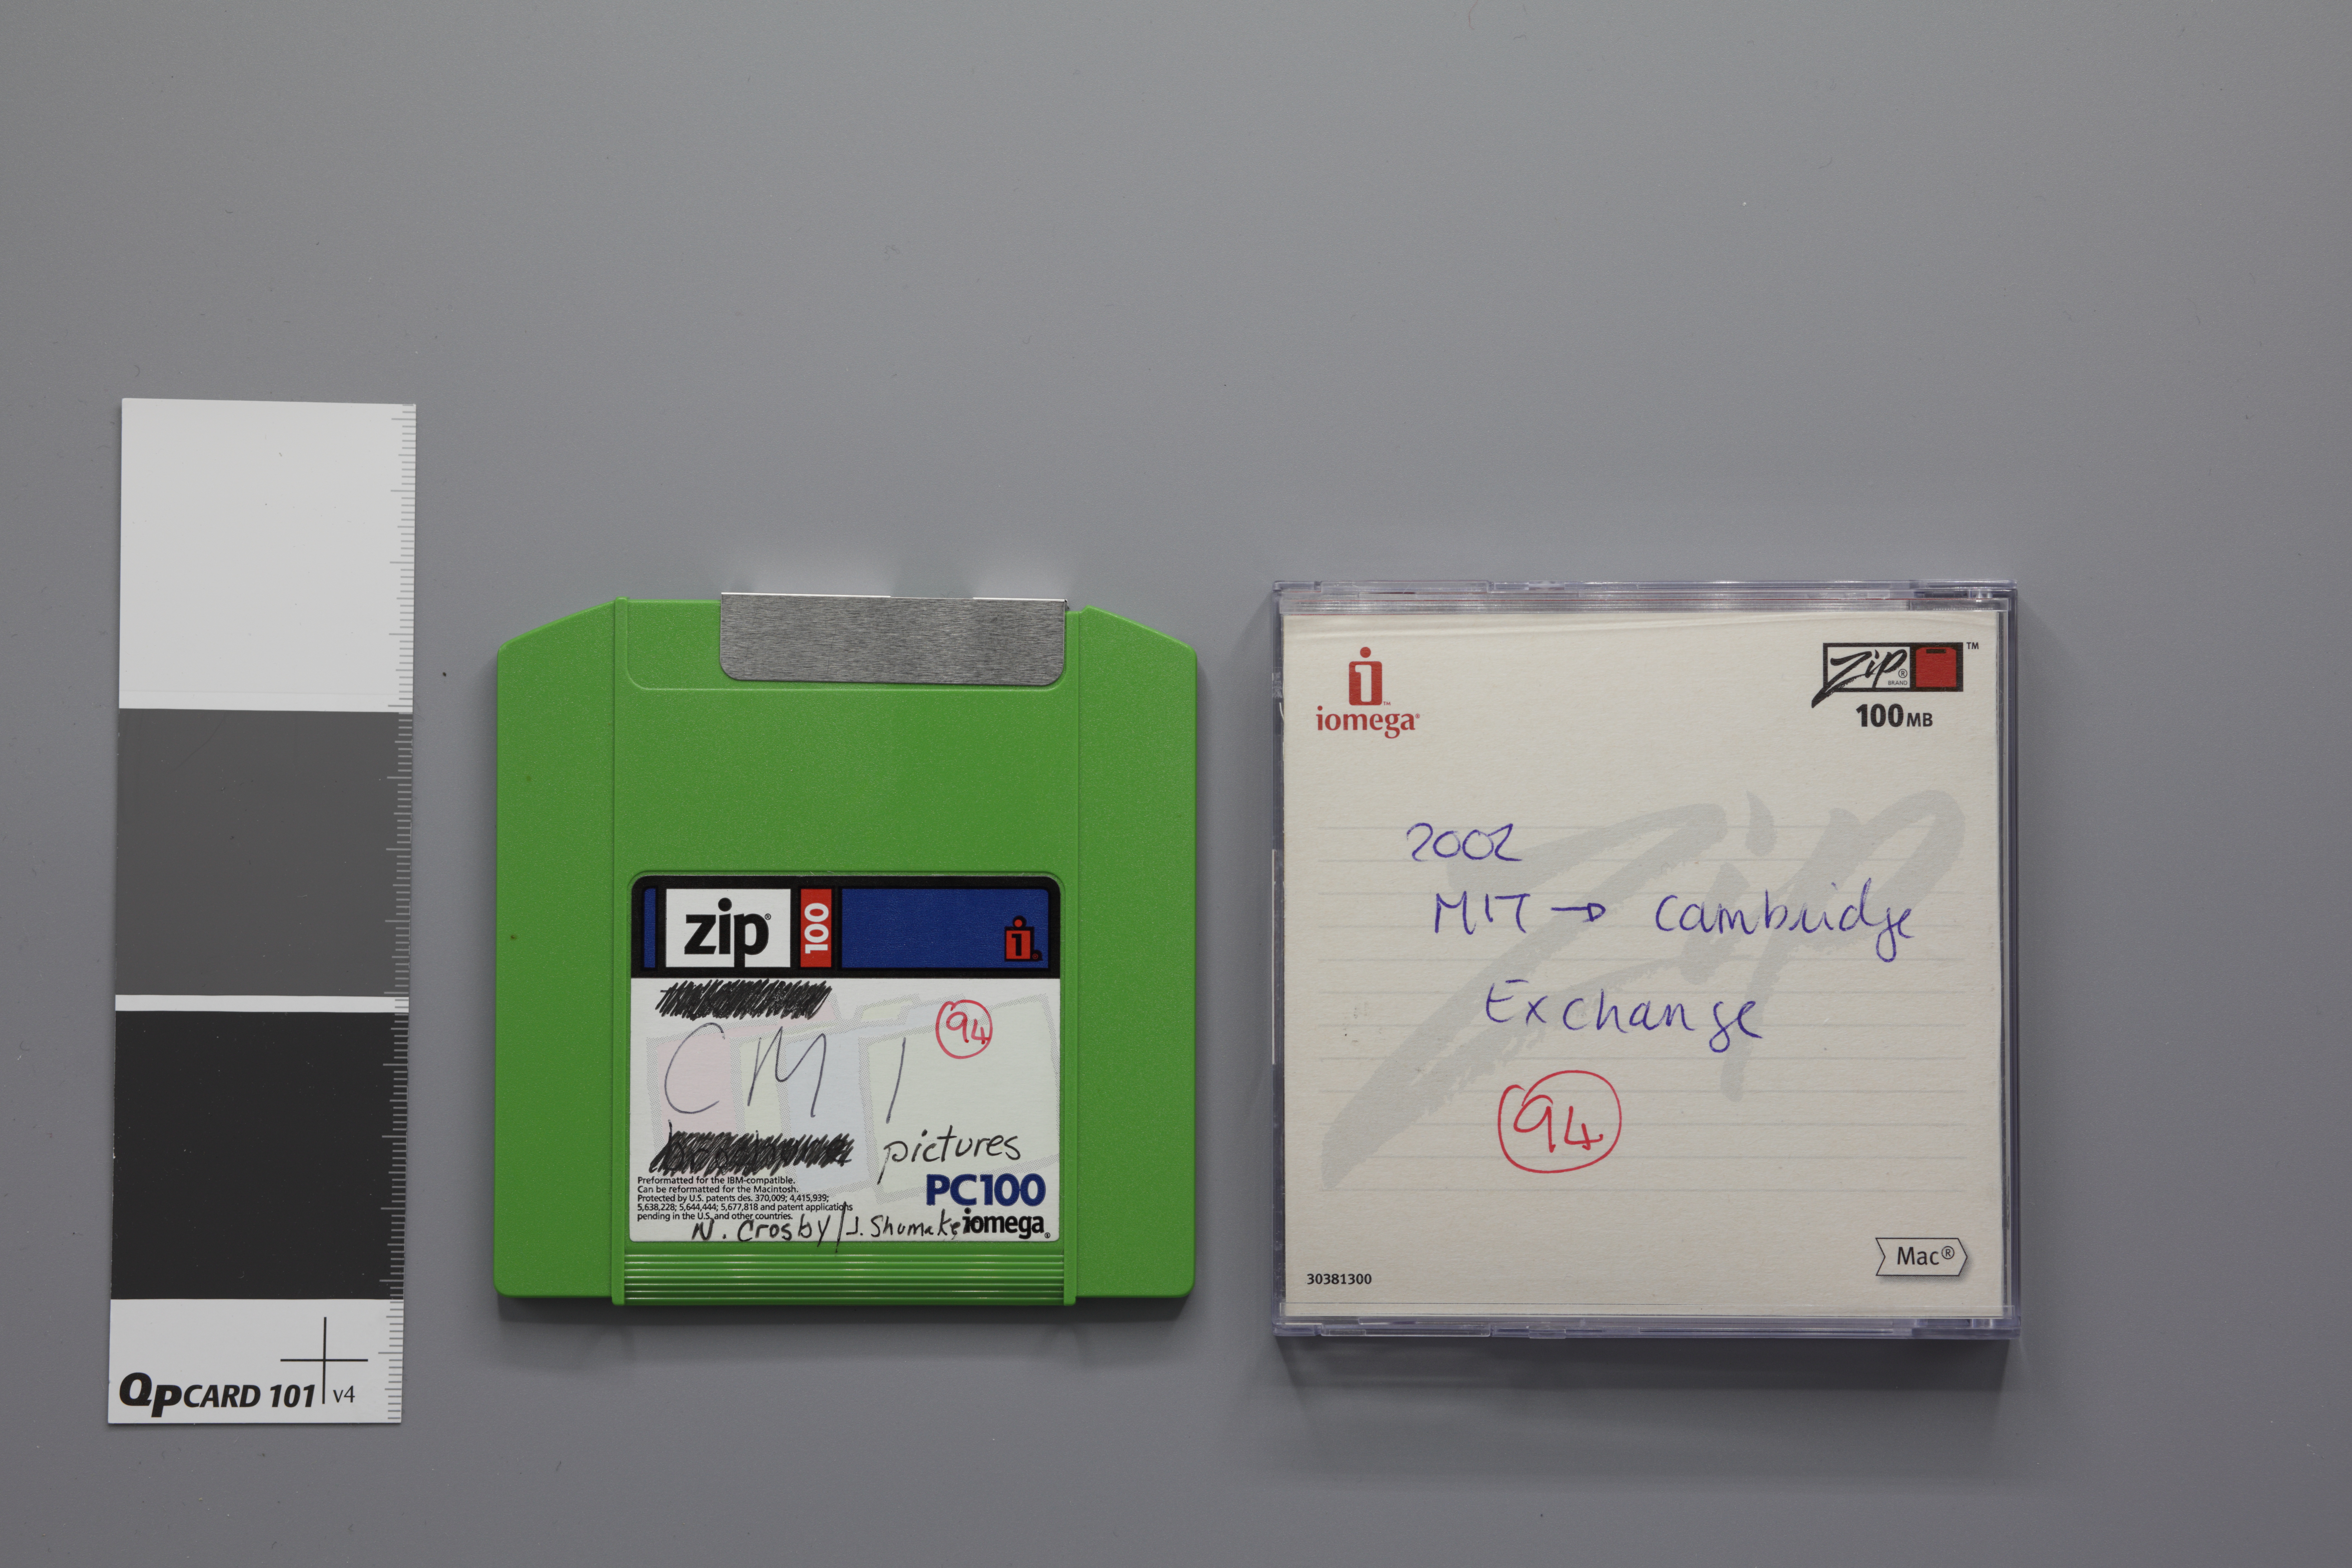 A ZIP Disk from the collection